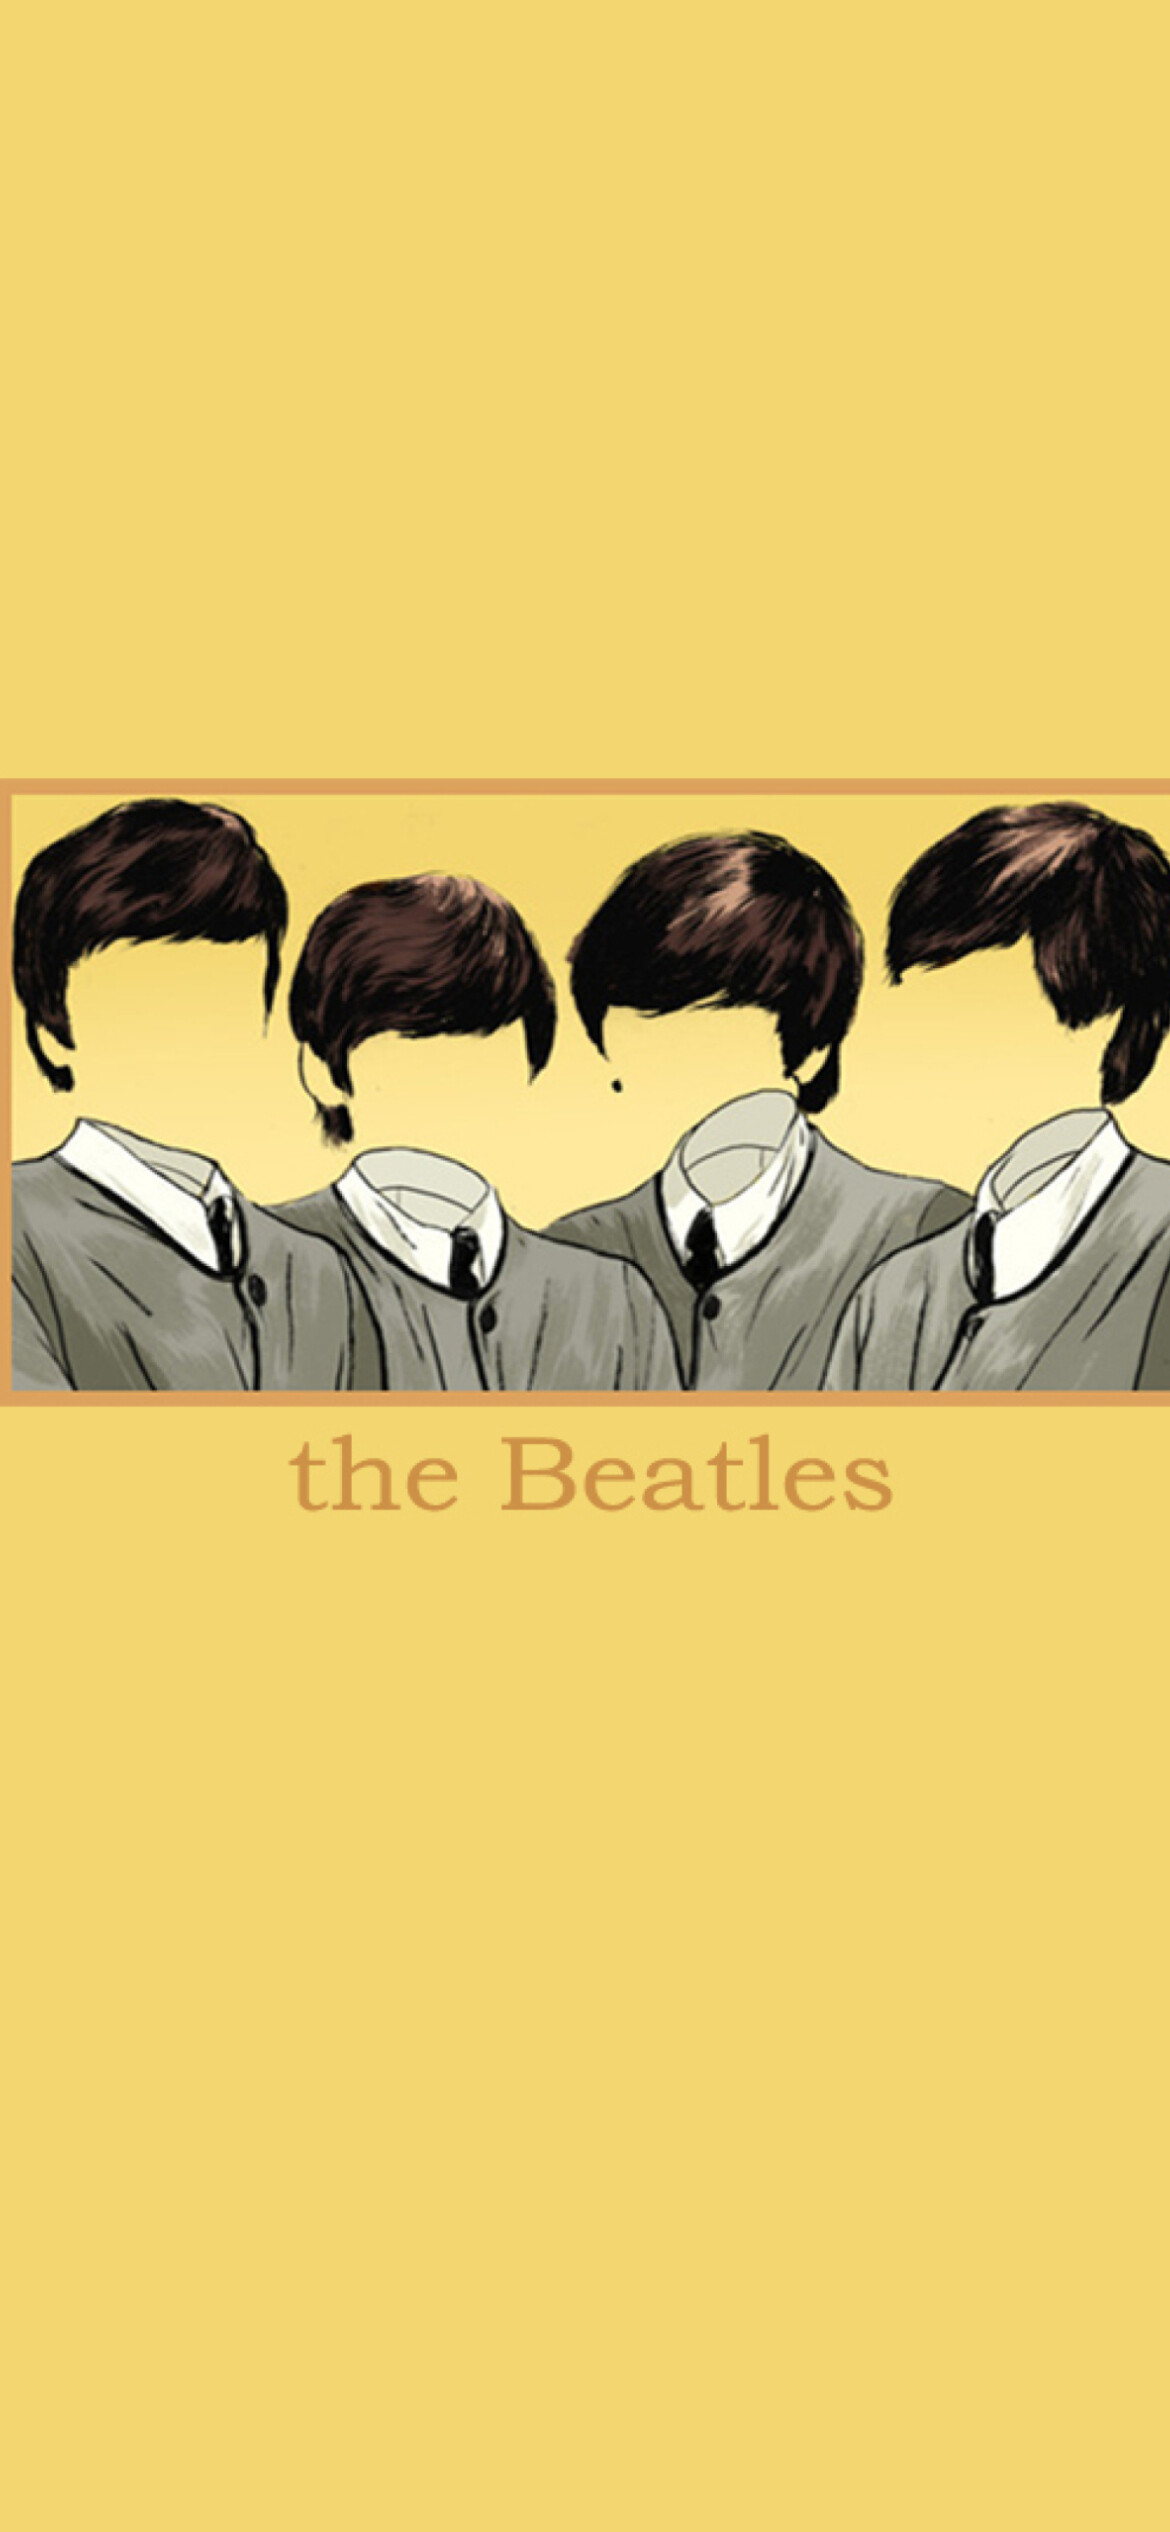 The Beatles: The band ushered in the British Invasion of the United States pop market. 1170x2540 HD Background.